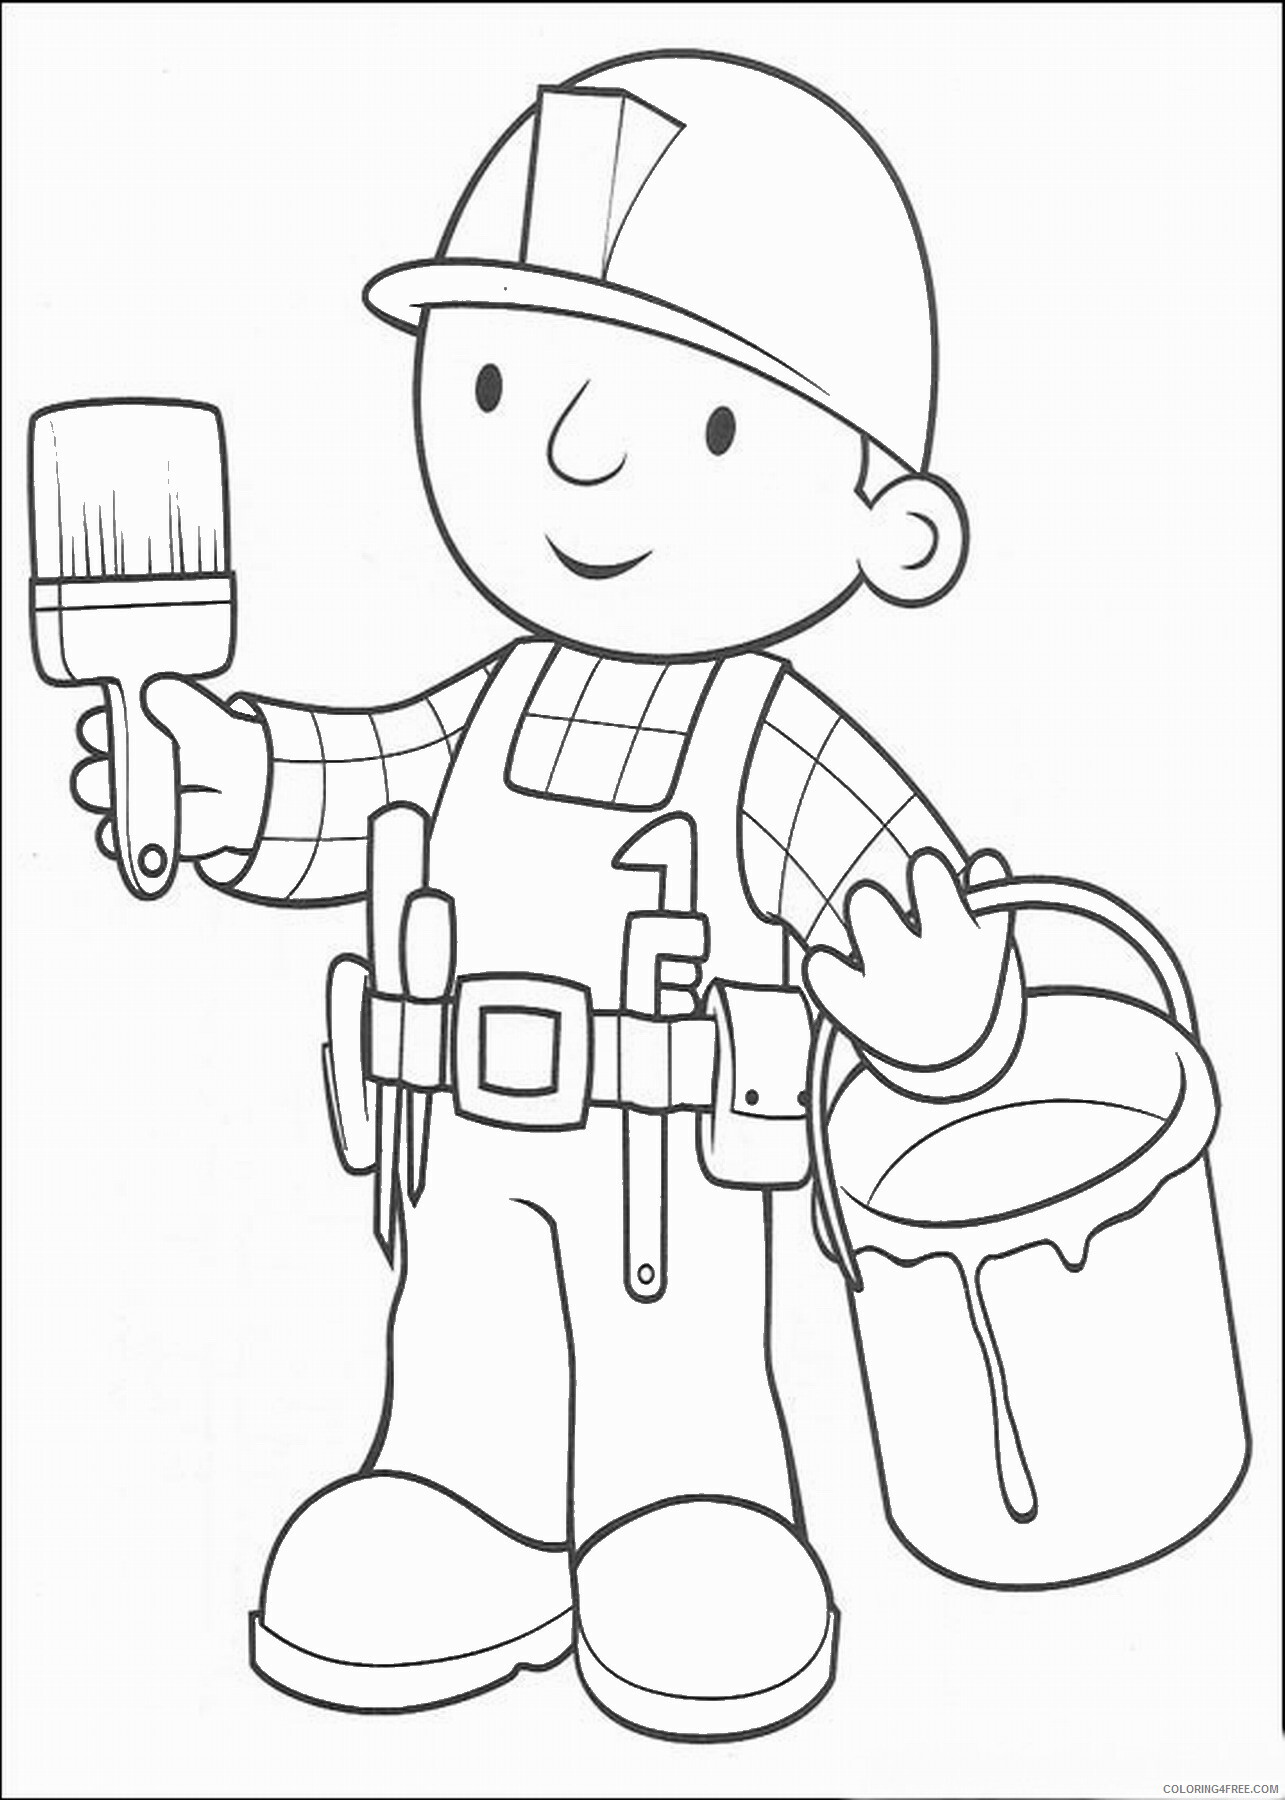 Bob the Builder Coloring Pages TV Film bob the builder_16 Printable 2020 00966 Coloring4free